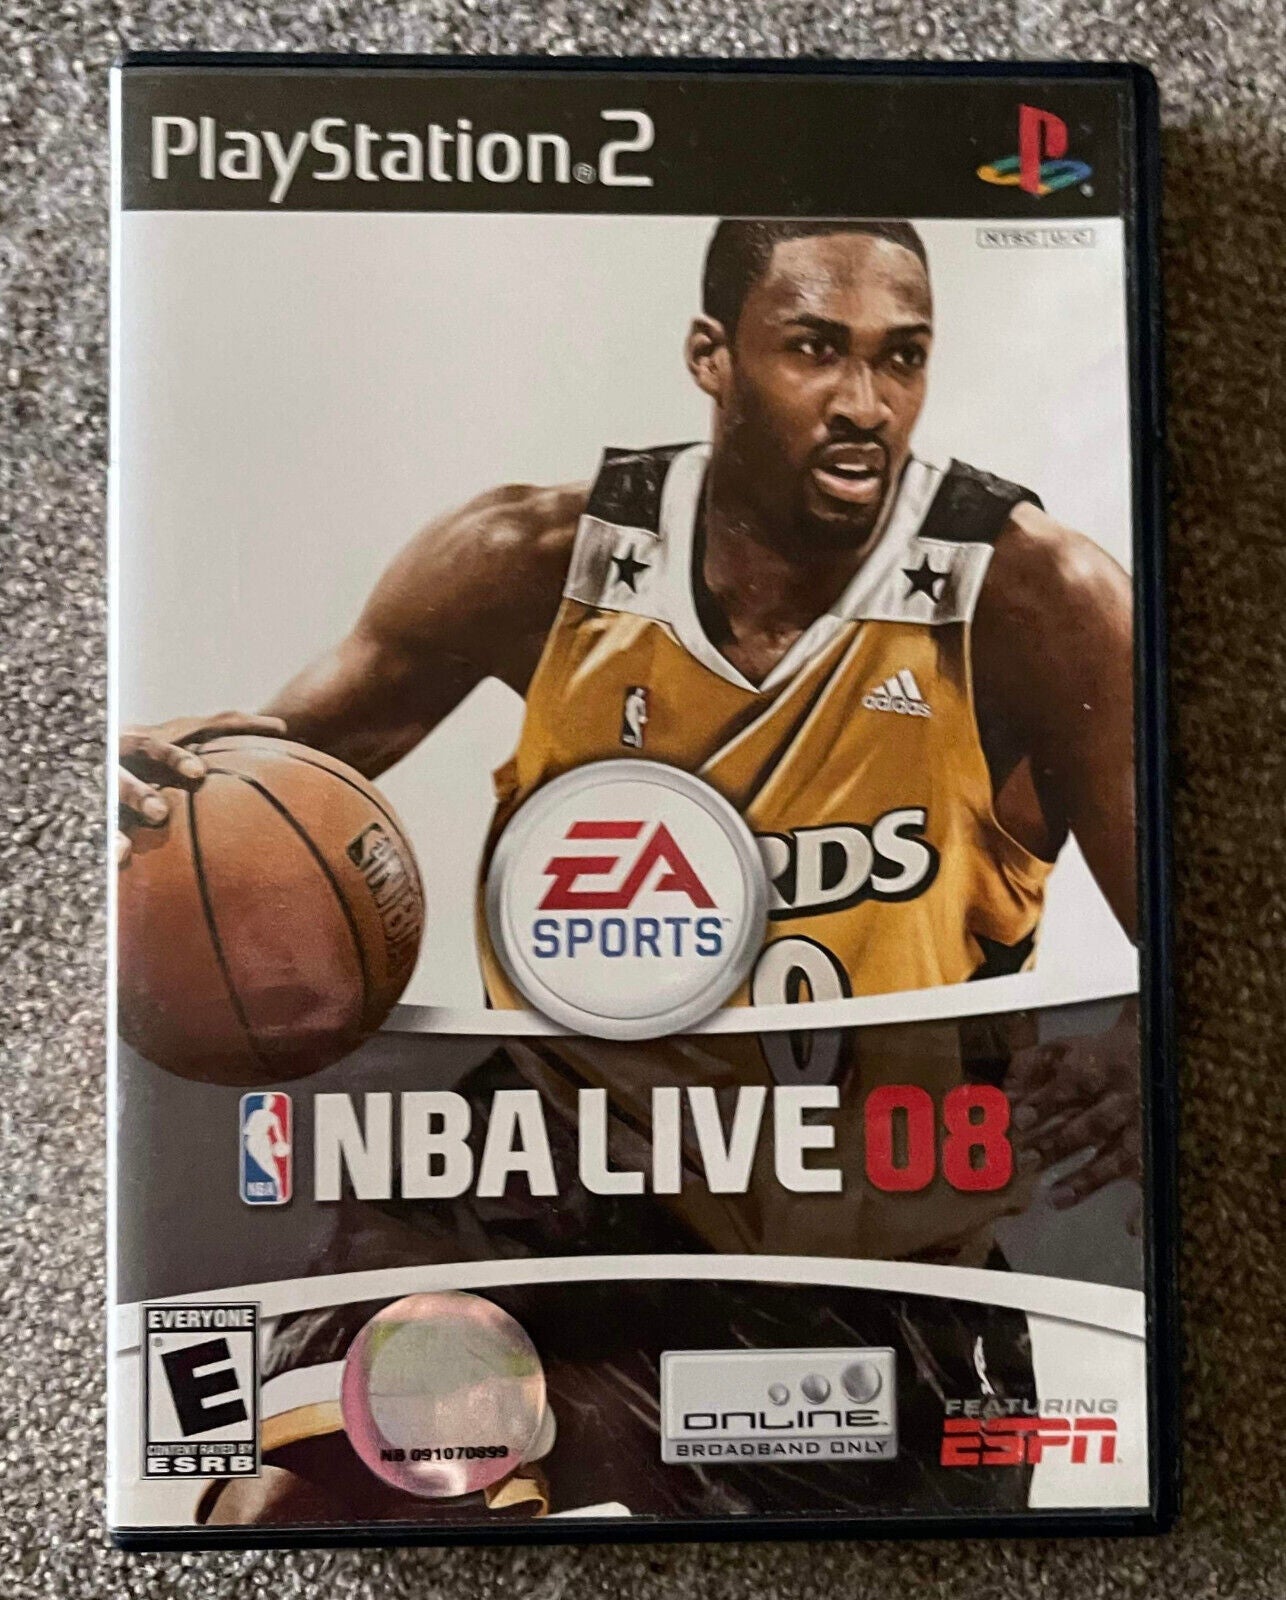 NBA Live 08 for PlayStation 2 PLAYSTATION 2 (PS2) Game w Case